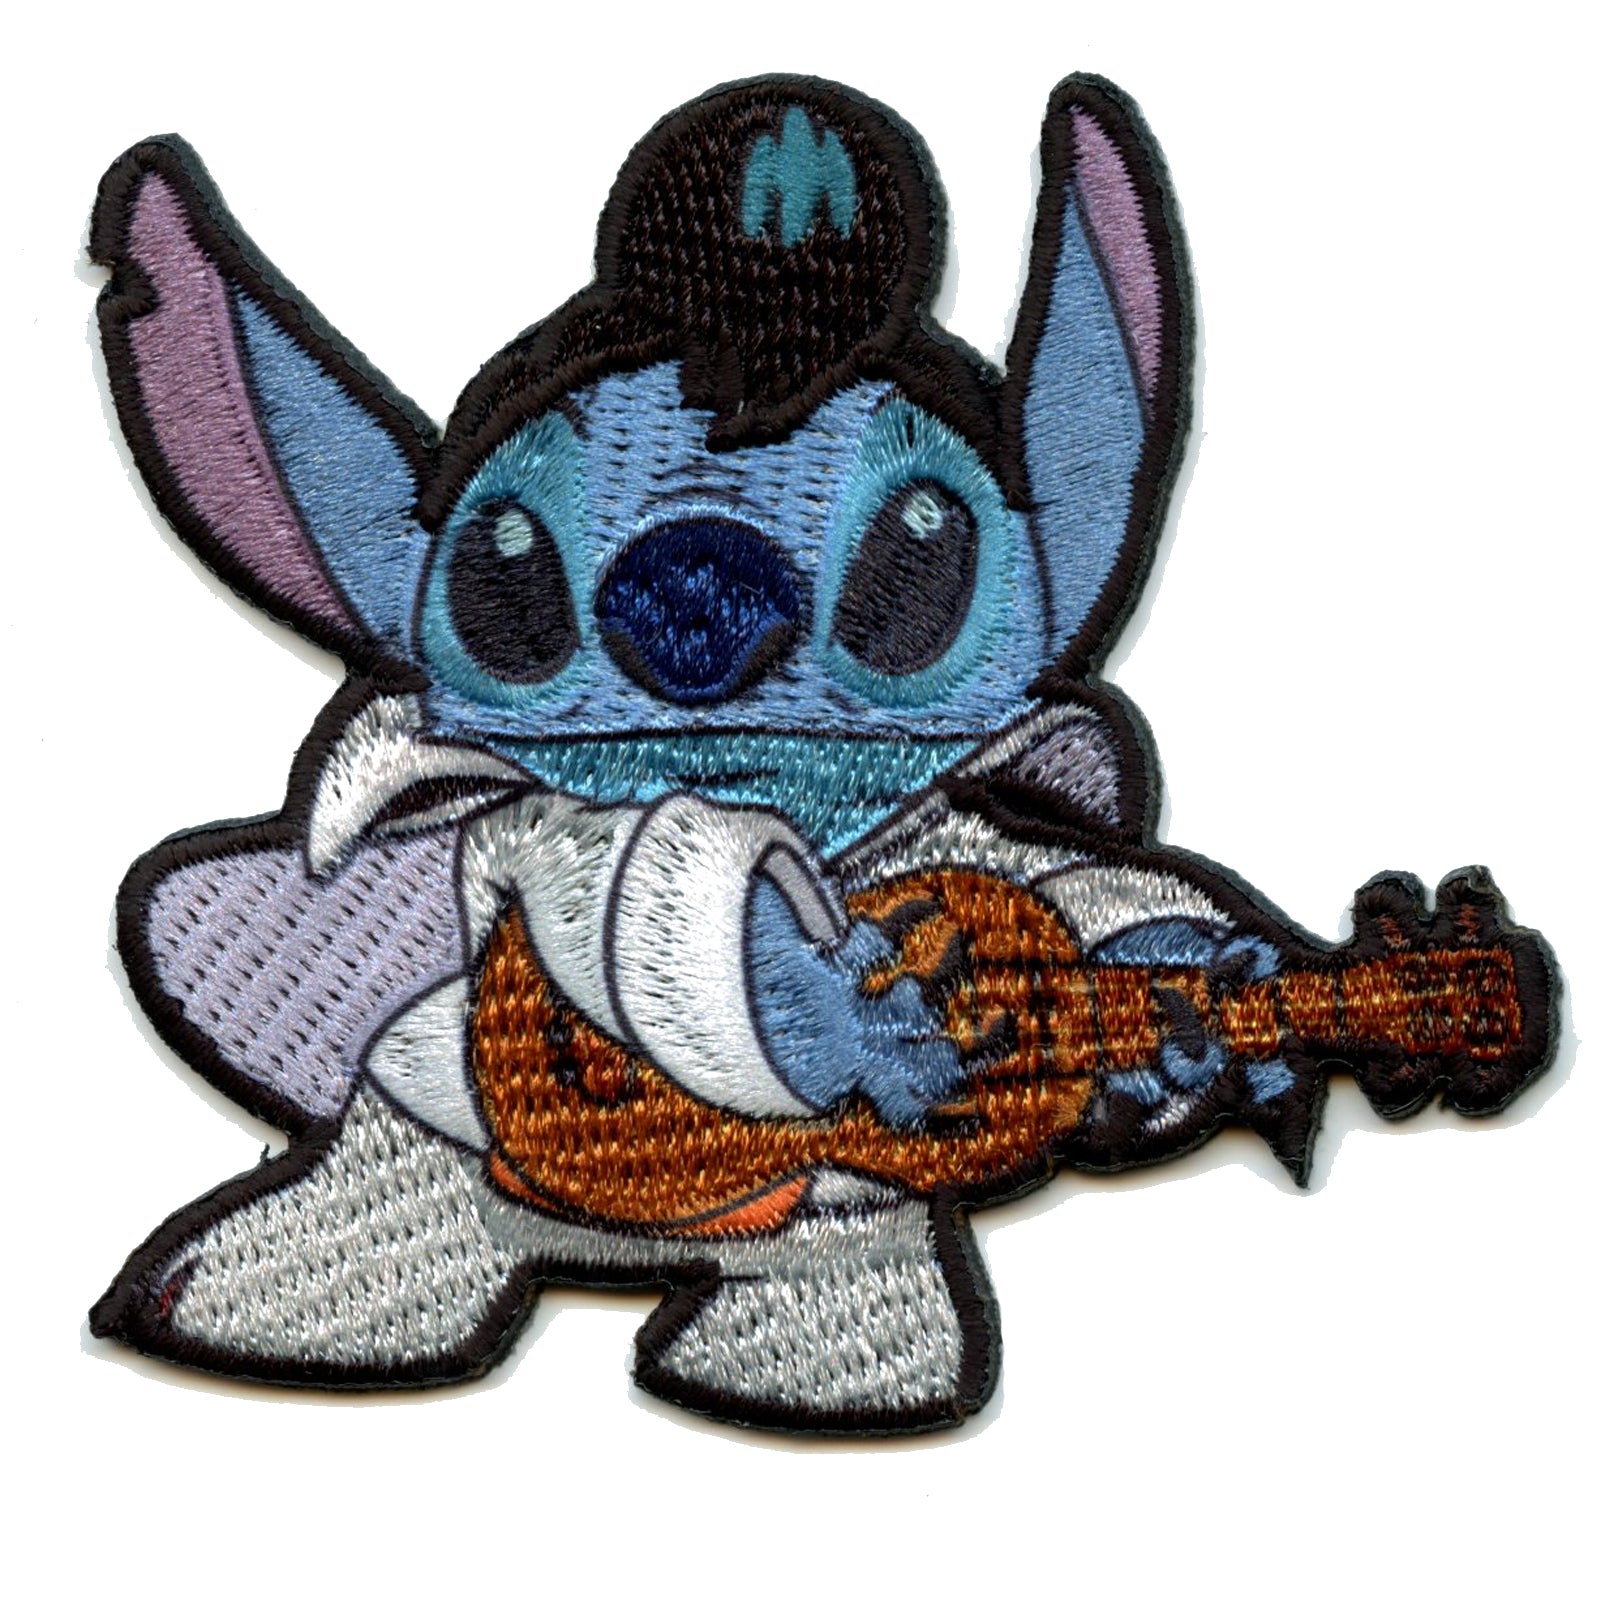 Accessories, Lilo And Stitch Patch Disney Iron On Patches